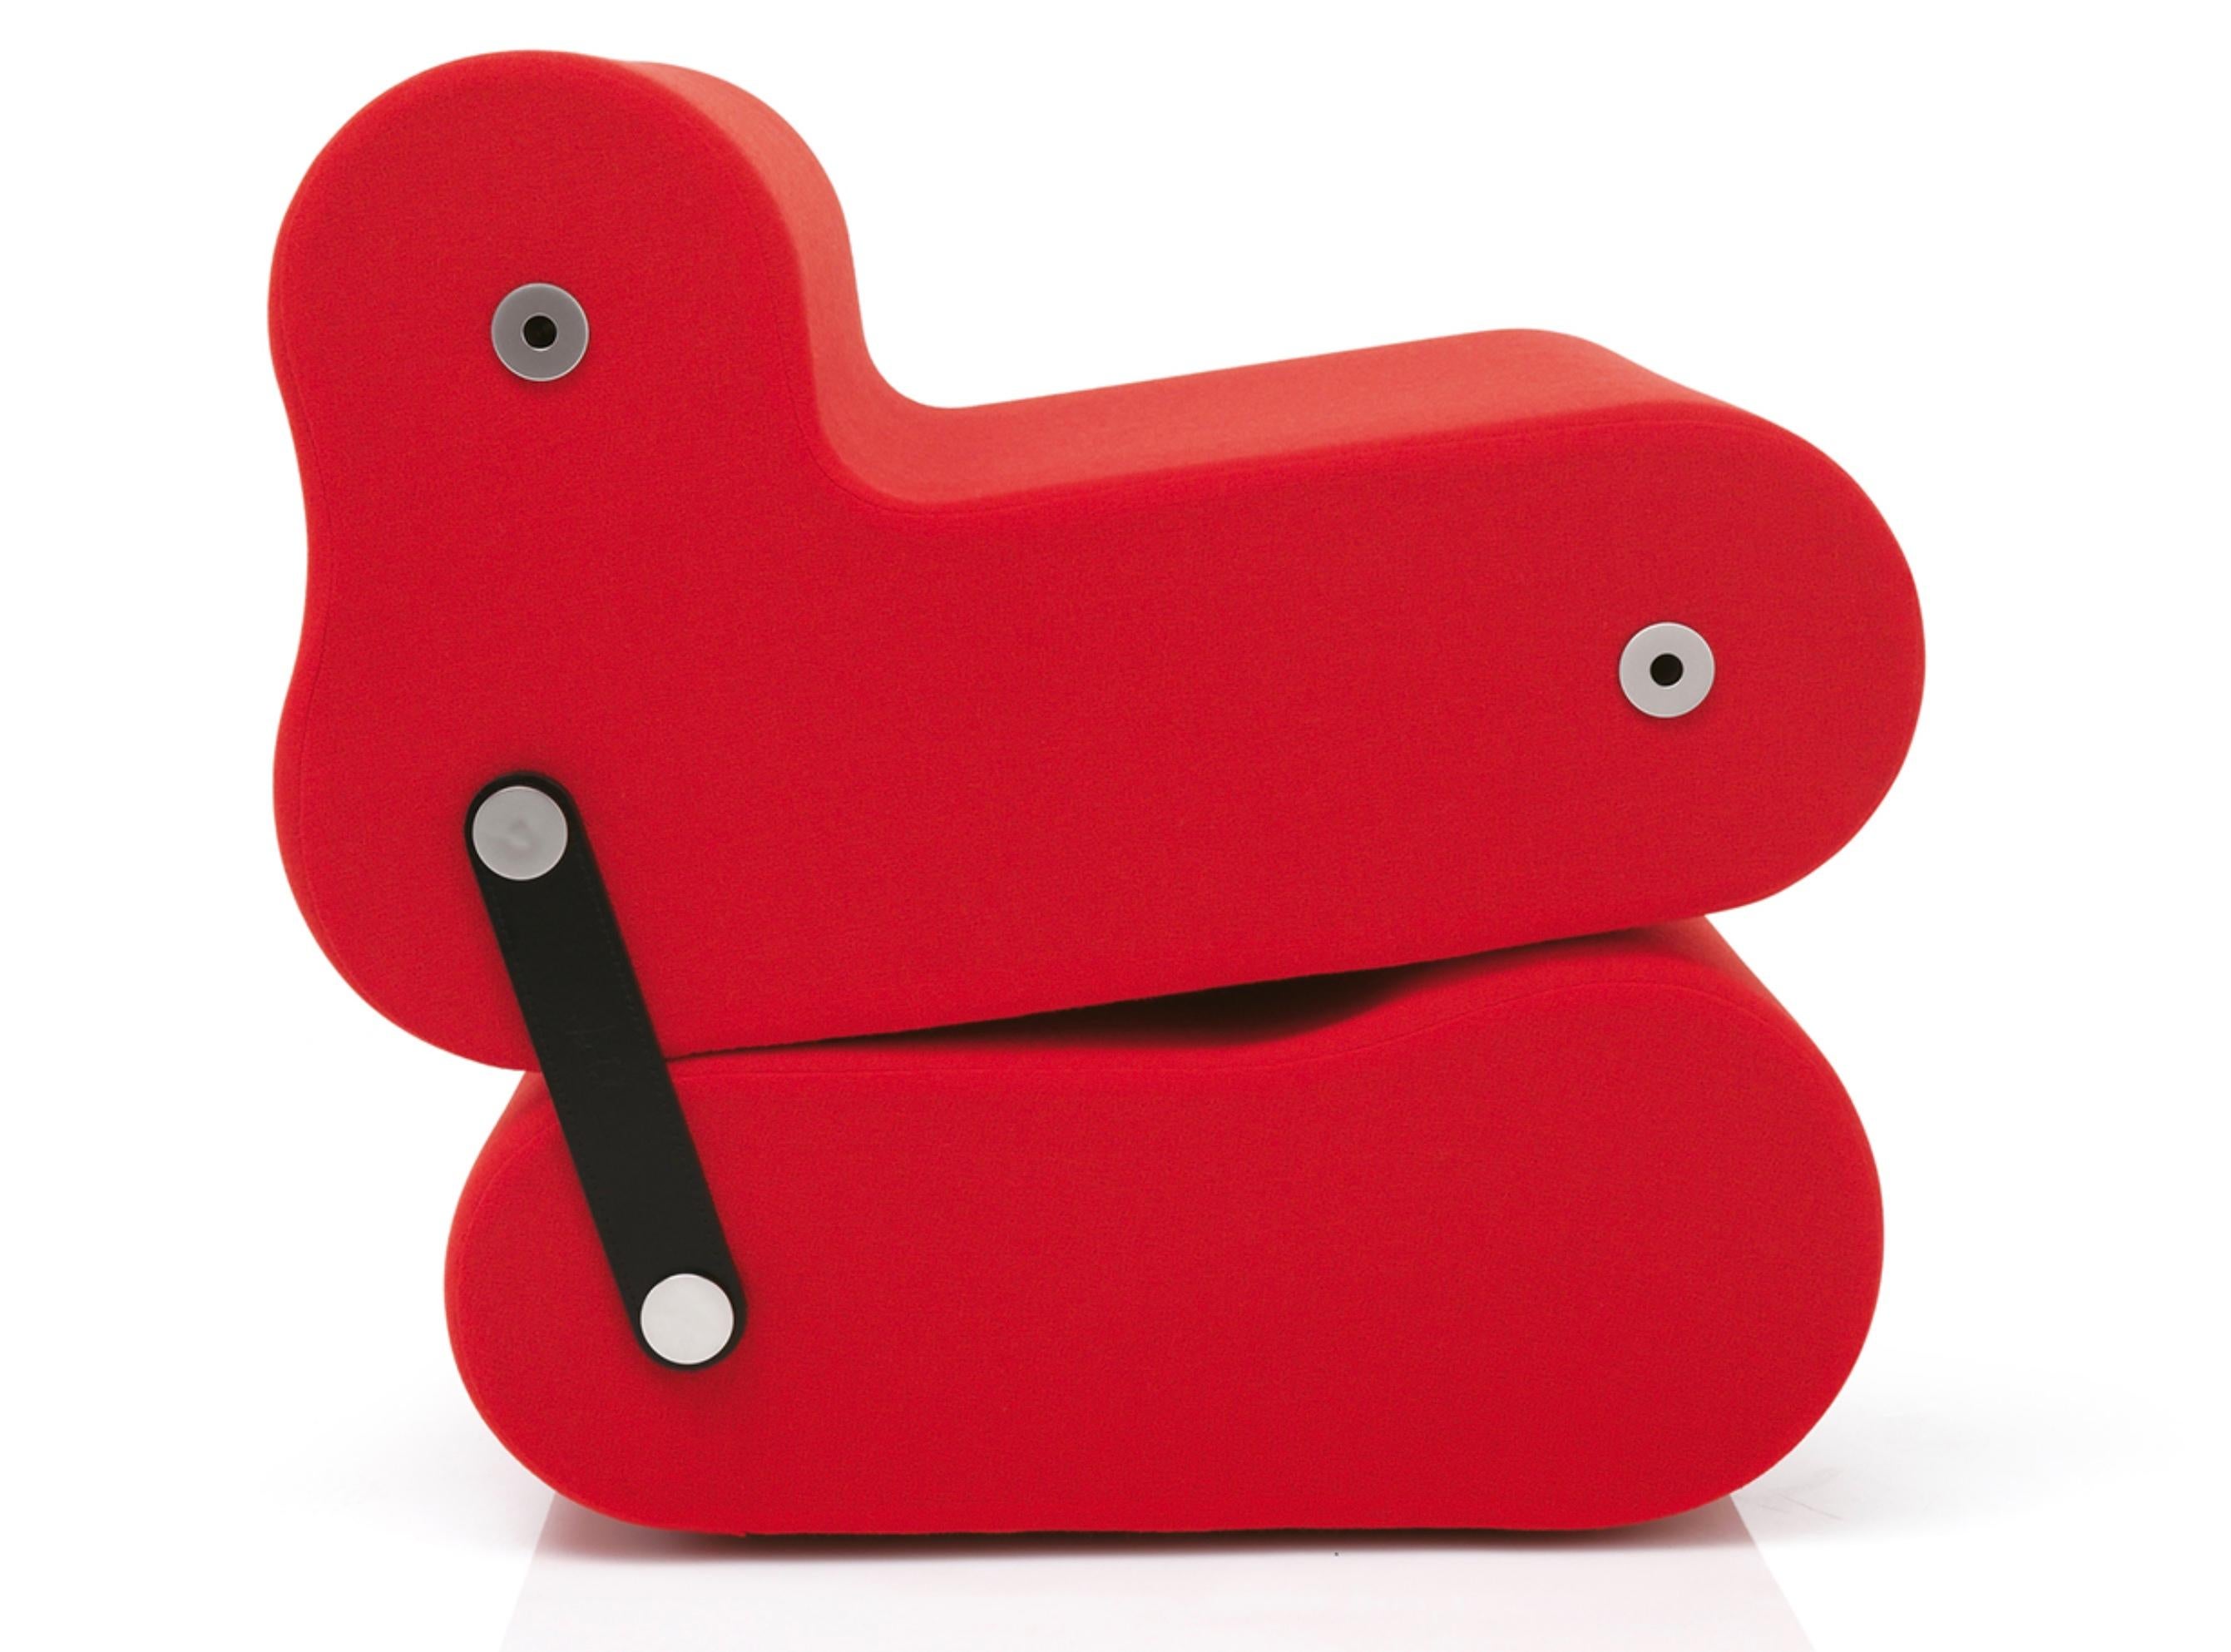 Joe Colombo 'Multichair' 1970 in Red for B-Line

Multichair is a convertible system consisting of two individual elements that can easily turn into a conversation/relaxation chair. This is a product designed with the total attention and full